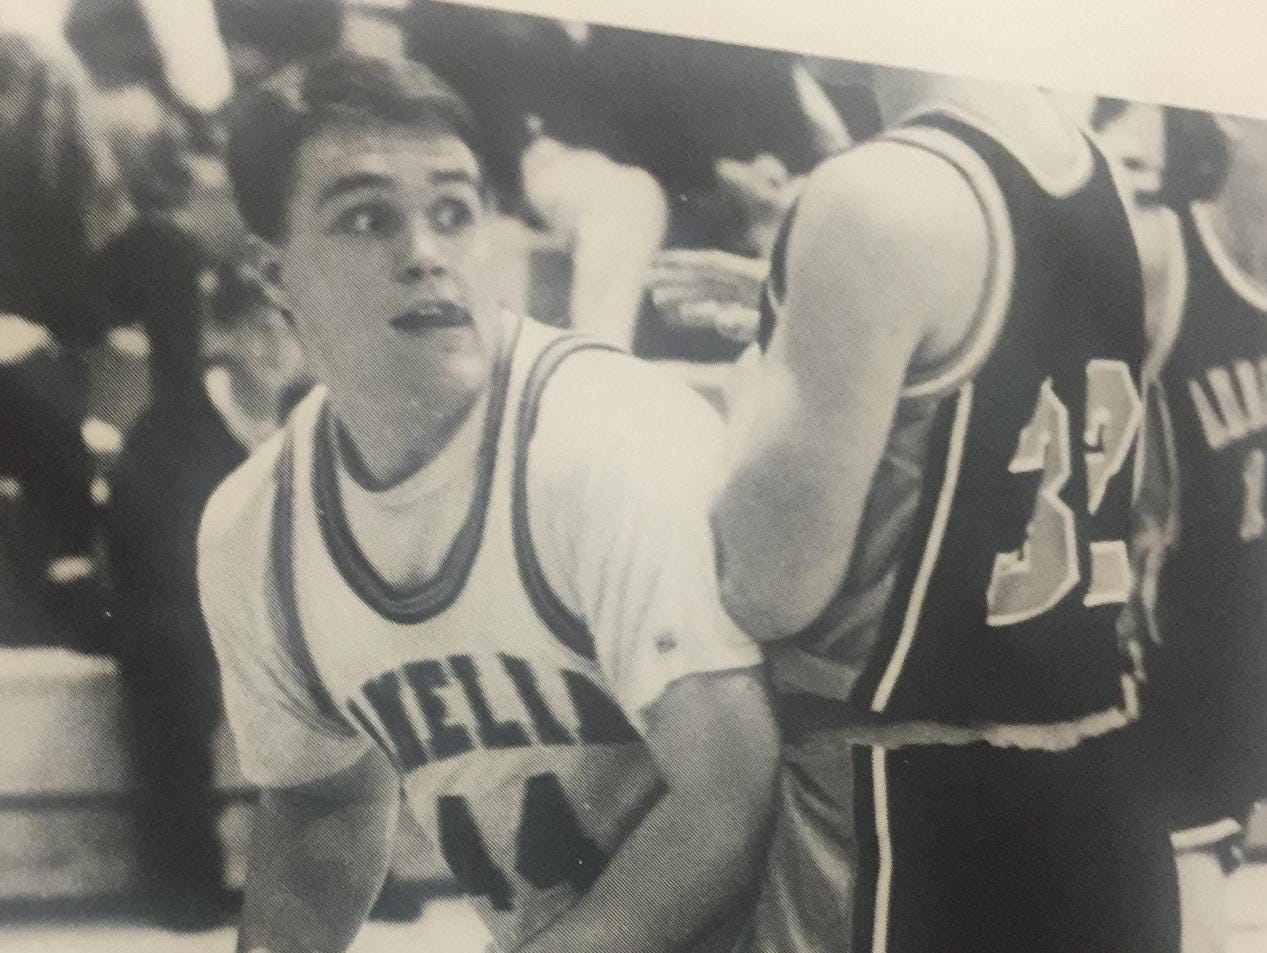 Current Amelia Athletic Director James Collins played for the Barons and Craig Mazzaro and graduated in 1994.